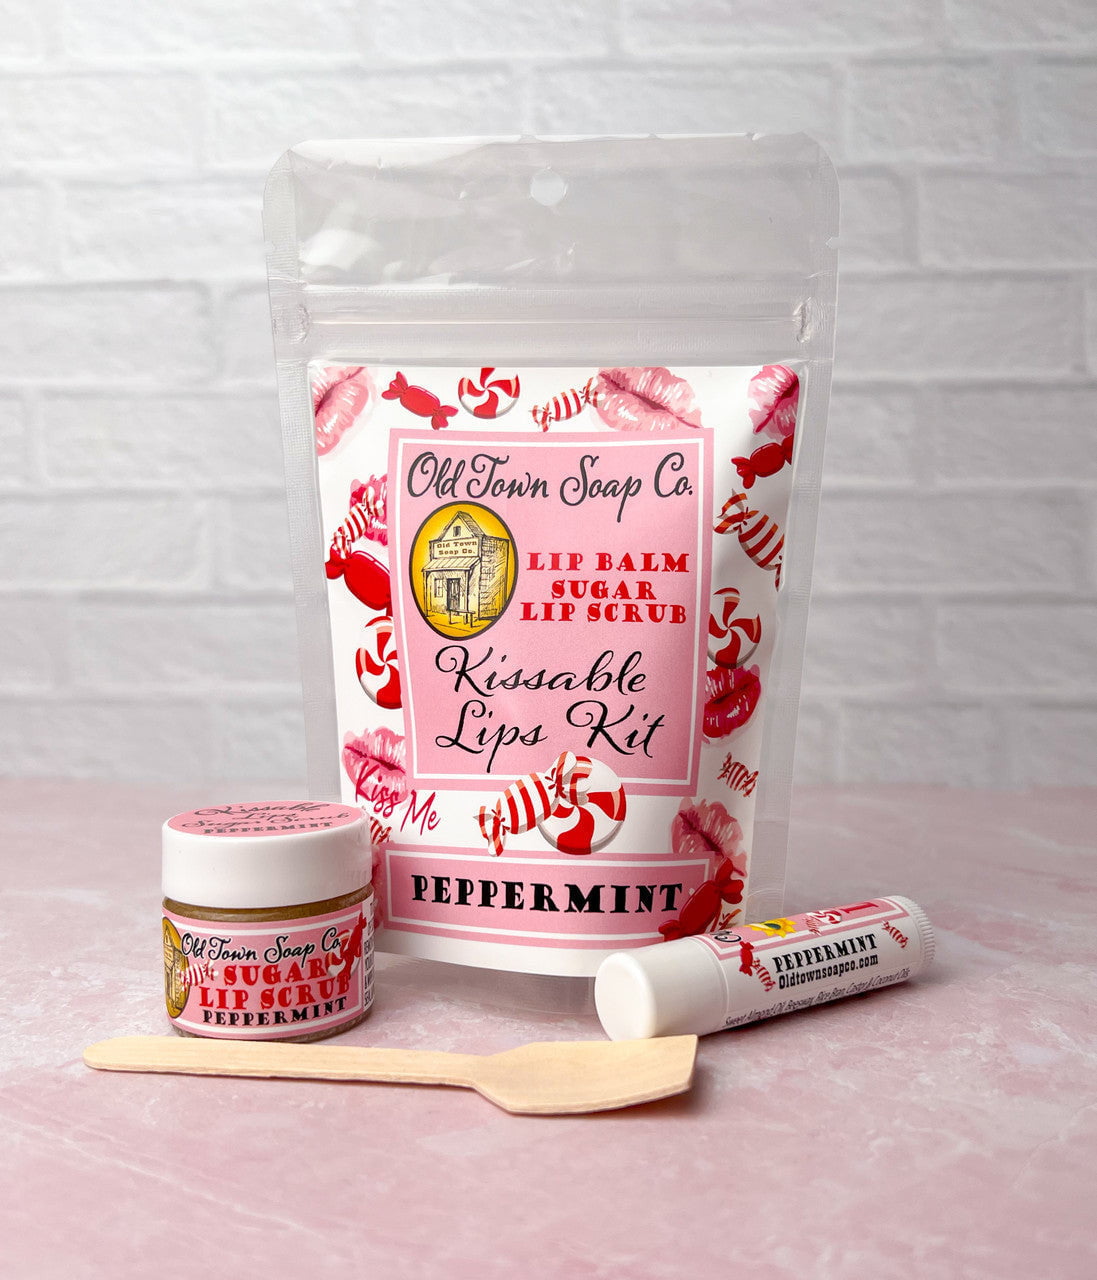 Peppermint -Kissable Lip Kit - Old Town Soap Co.